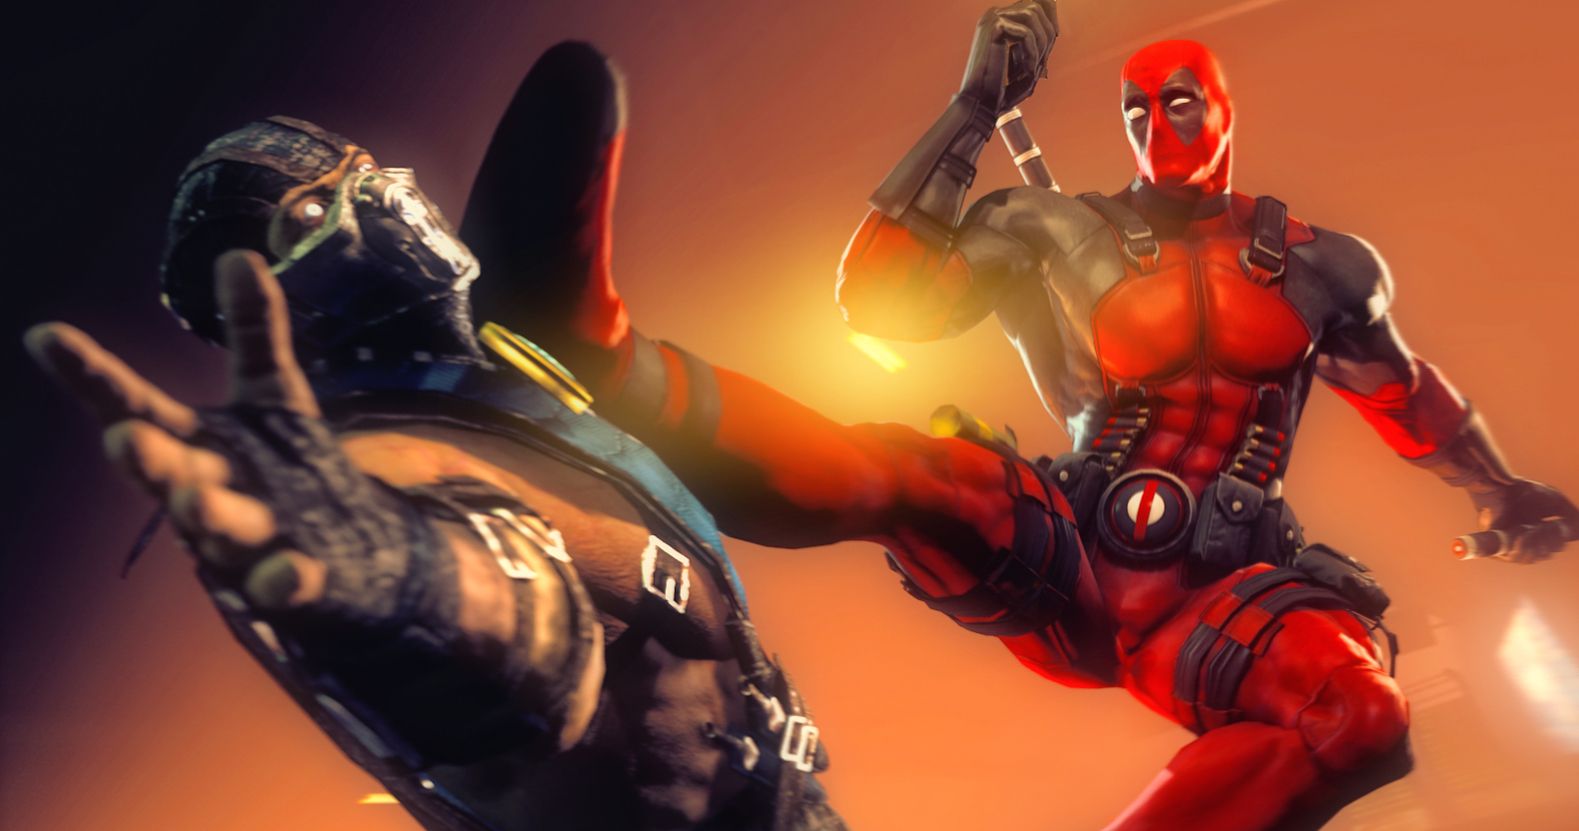 Mortal Kombat Reboot Gets Compared to Deadpool, Will Be Fun &amp; Over-The-Top